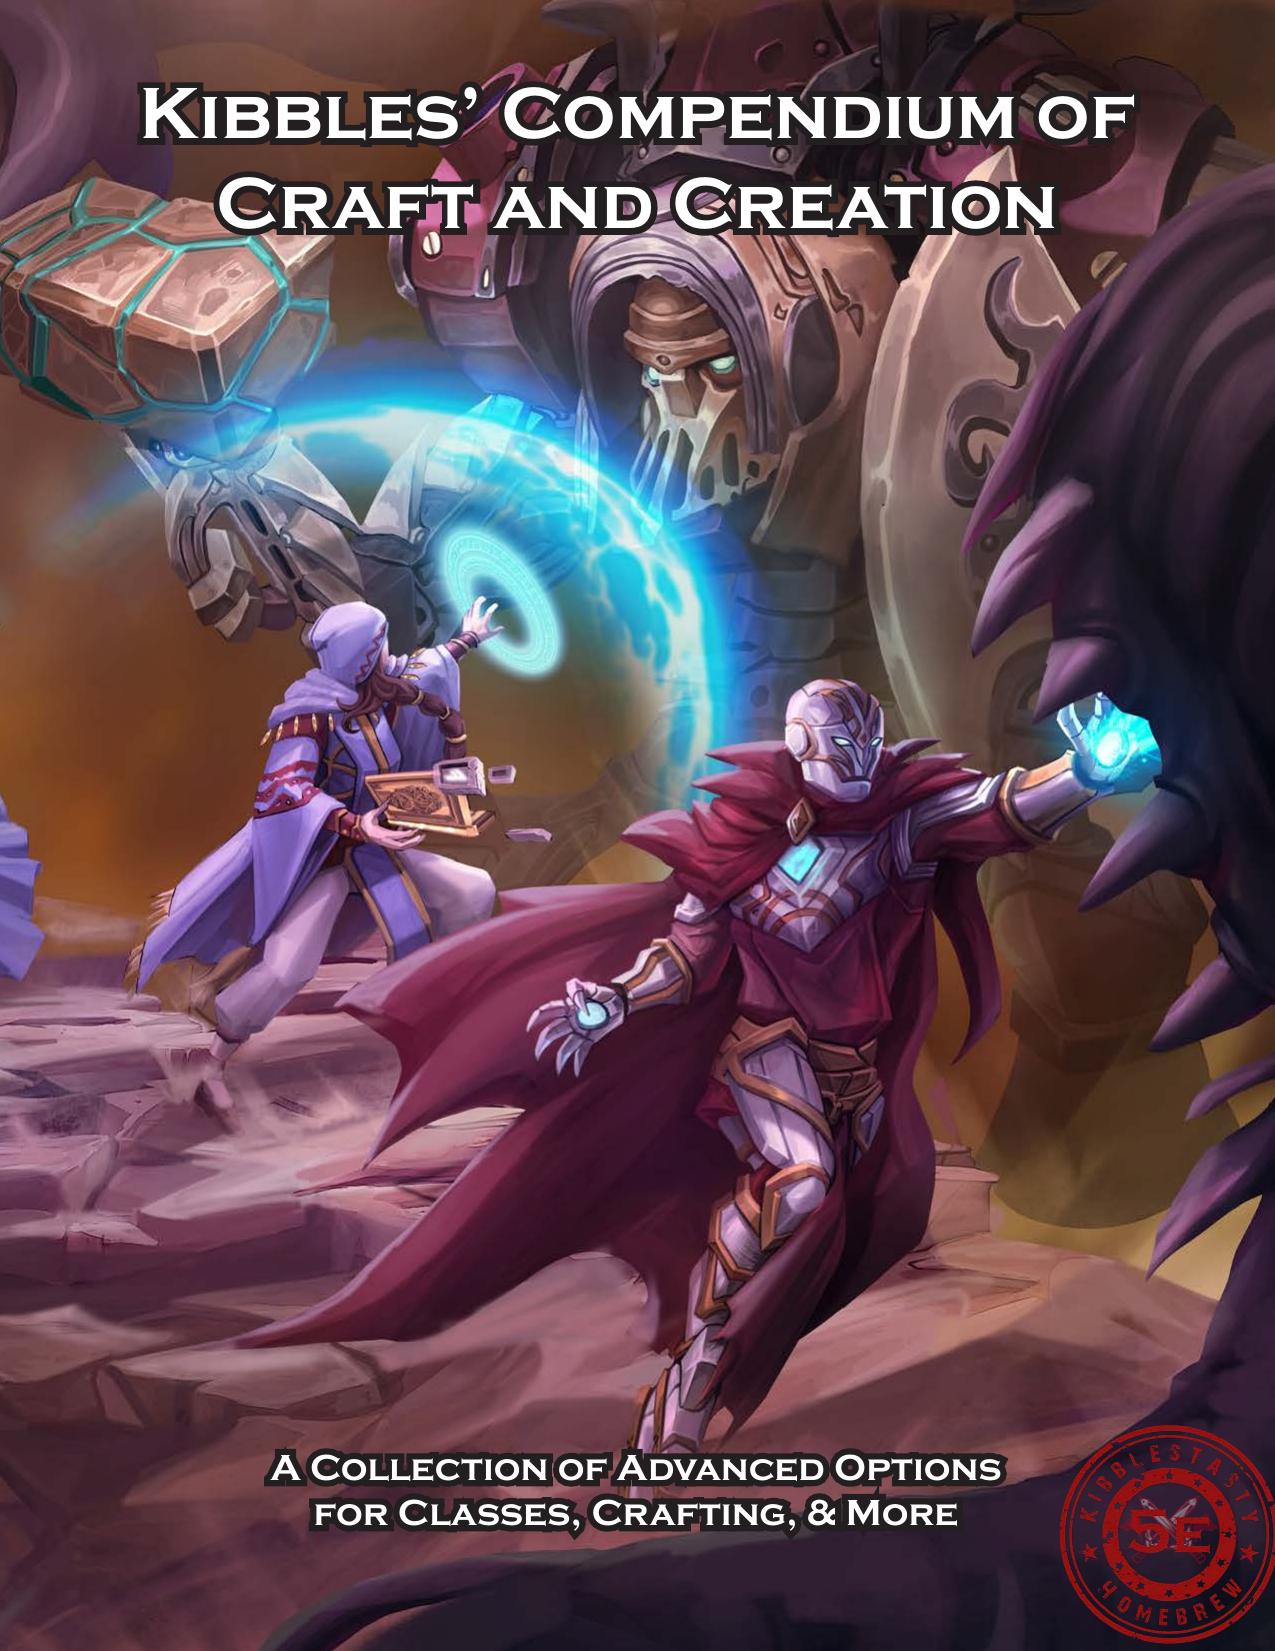 Kibbles' Compendium of Craft and Creation